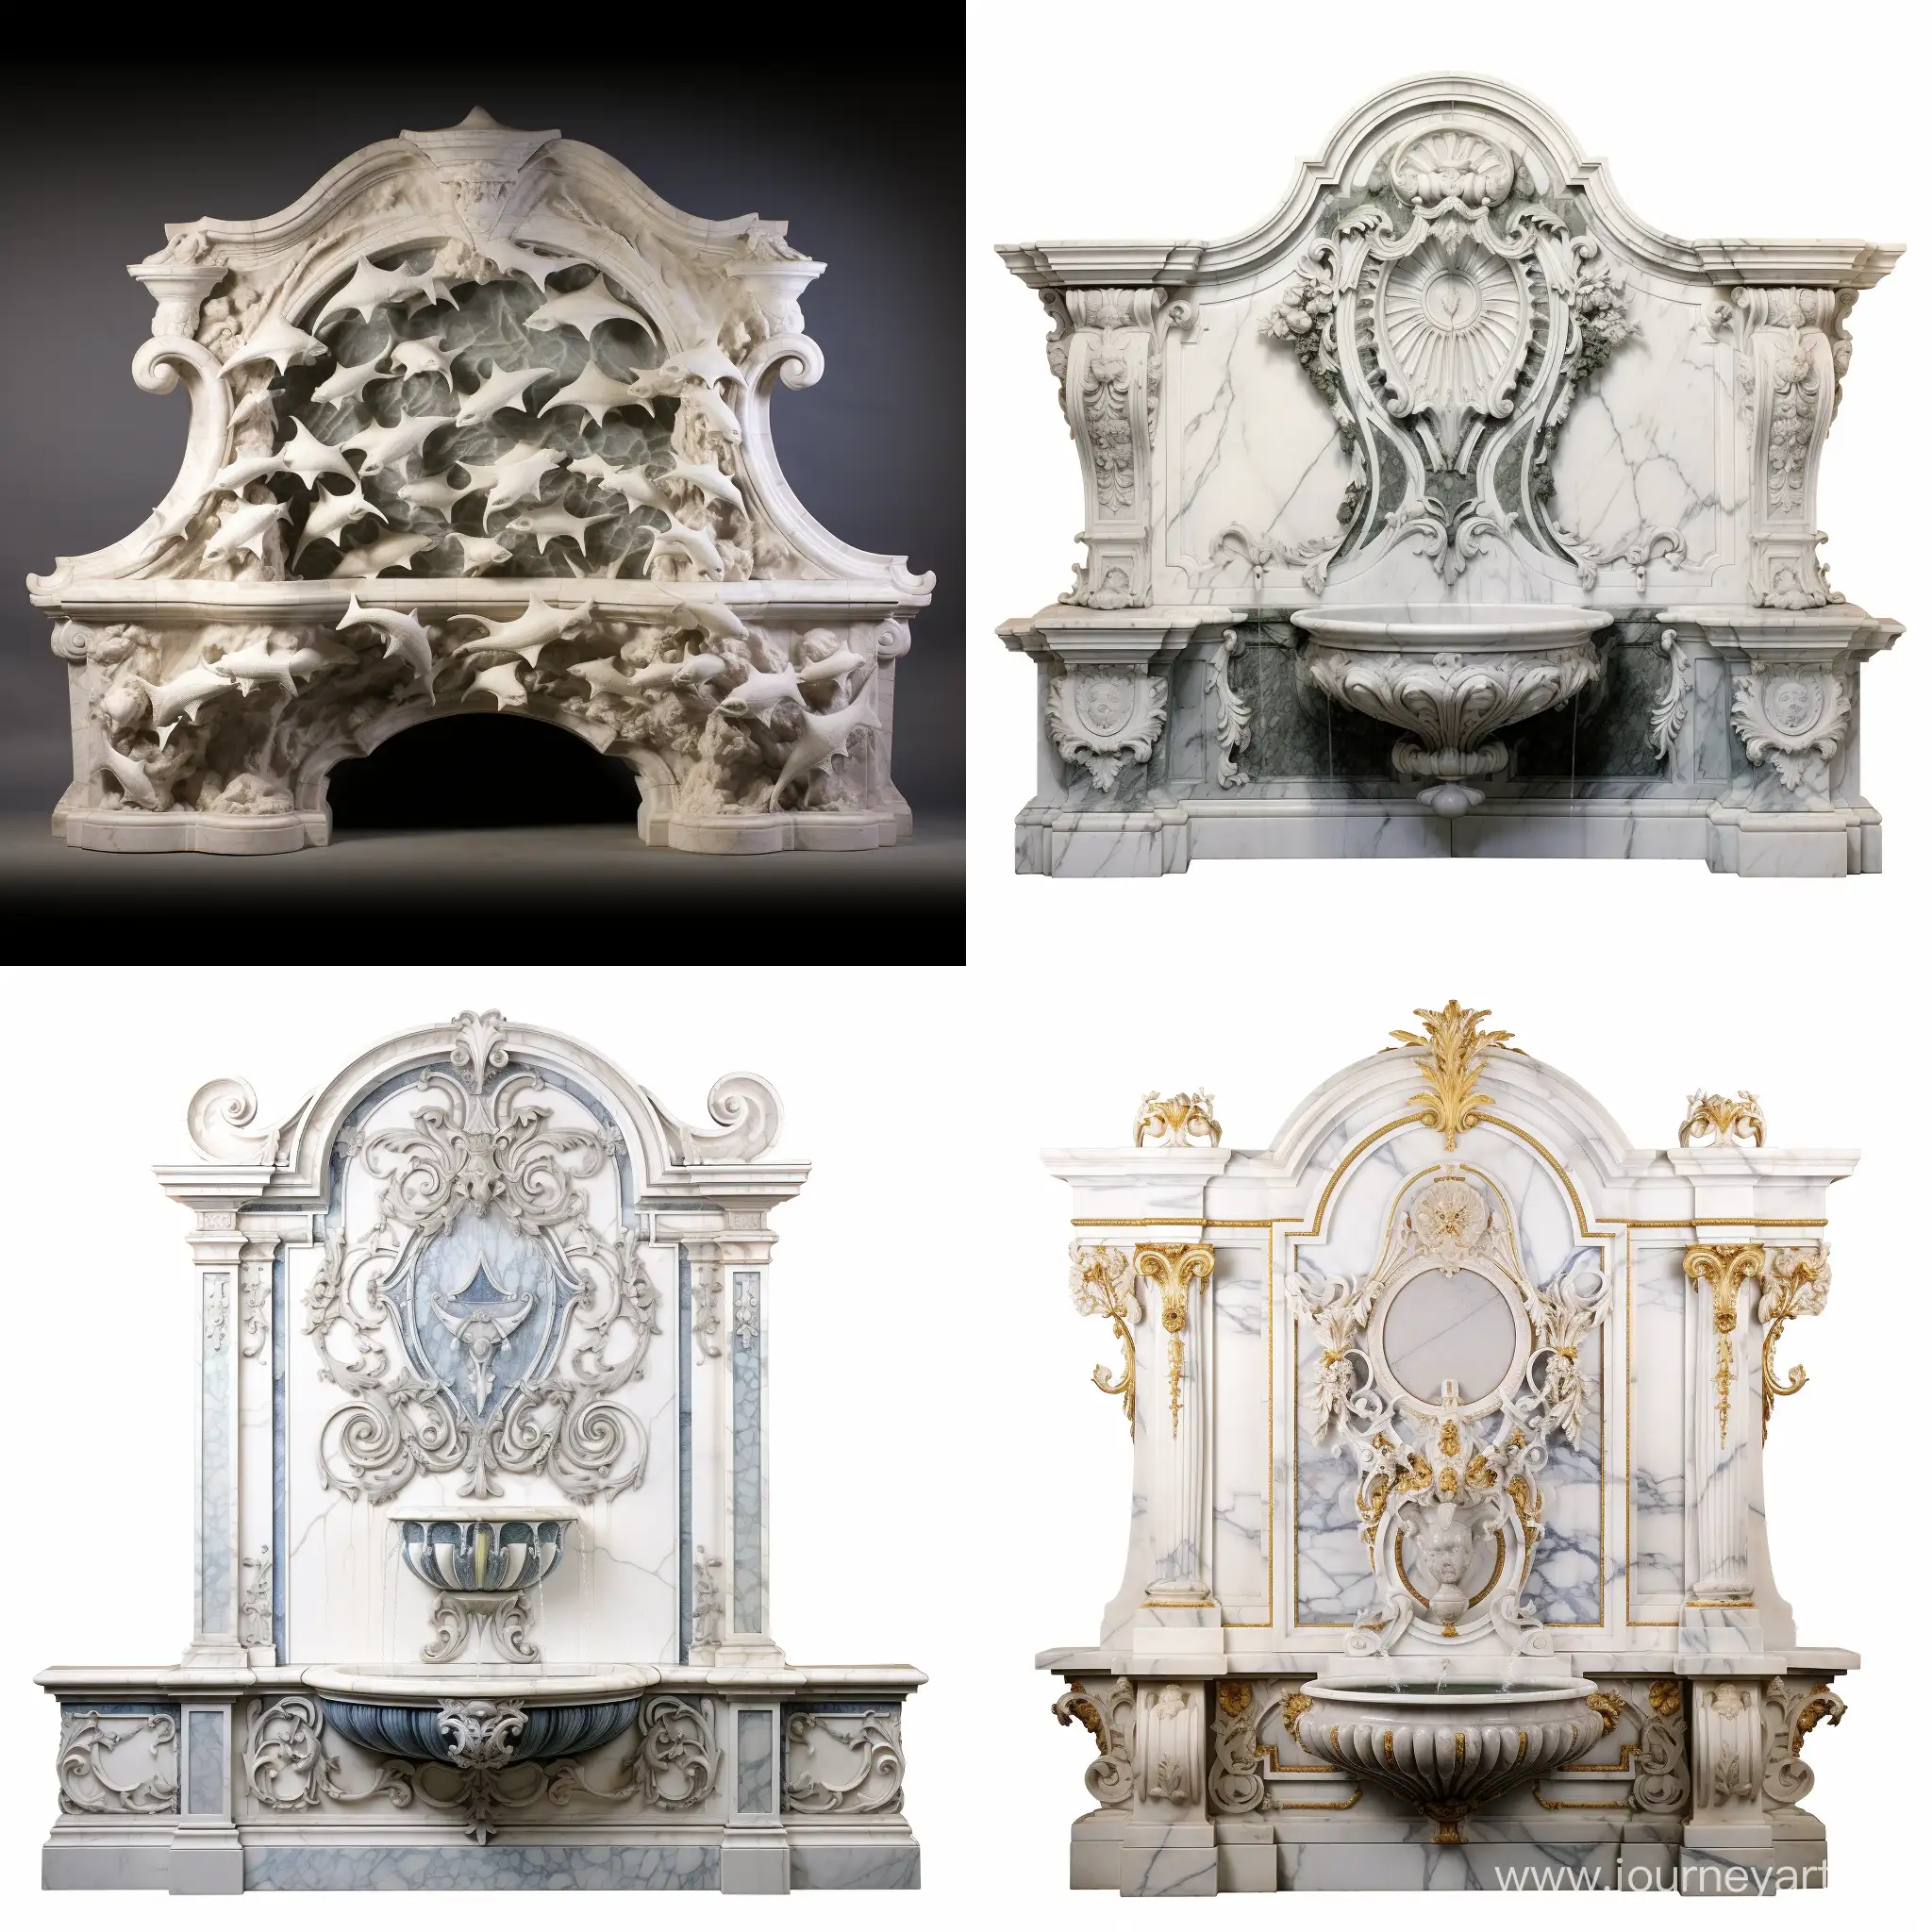 Graceful-Dolphin-Sculpture-in-Baroque-Patterned-Marble-Wall-Fountain